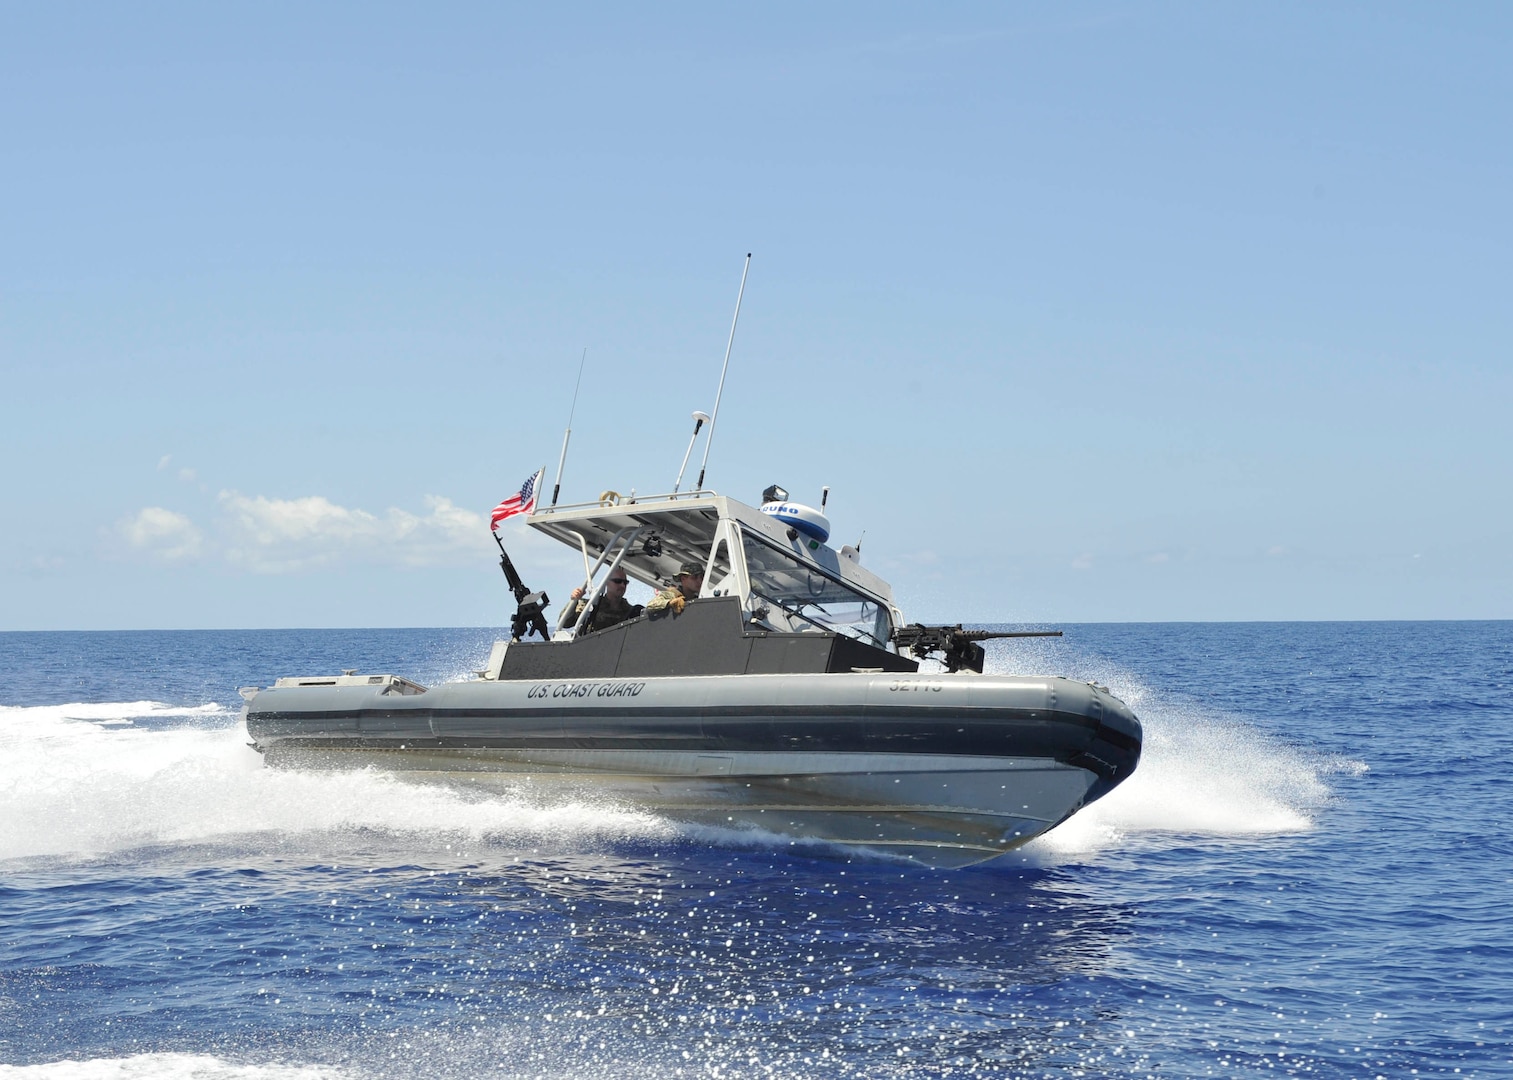 Coast Guardsmen from Port Security Unit 305 aboard a 32-foot Transportable Port Security Boat patrol a security zone off the coast of Guantanamo Bay, Cuba, Saturday, July, 15, 2017. Coast Guard PSUs serve as anti-terrorism force protection expeditionary units with boat crews and shore-side security teams capable of supporting port and waterway security anywhere the military operates.